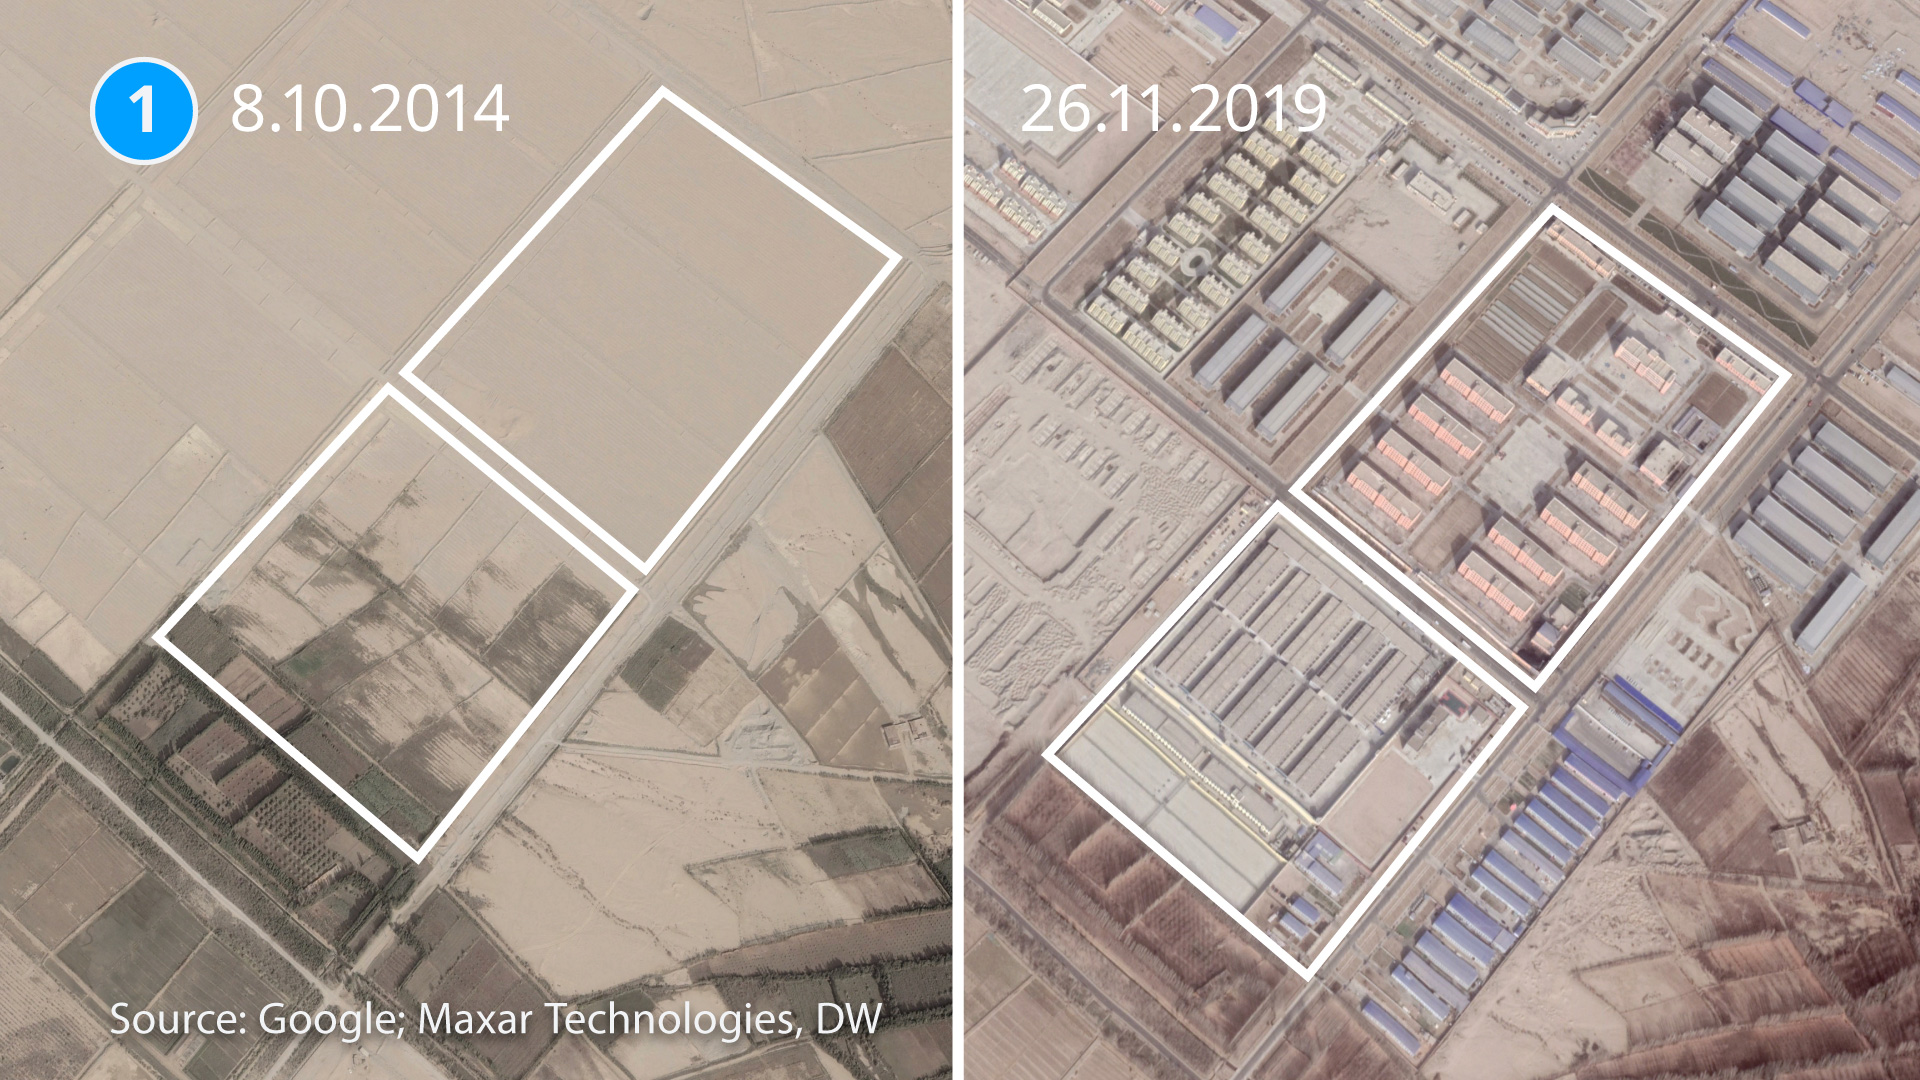 DW Investigative project: Uighur re-education camp in China (source: Google/Maxar Technologies/DW)